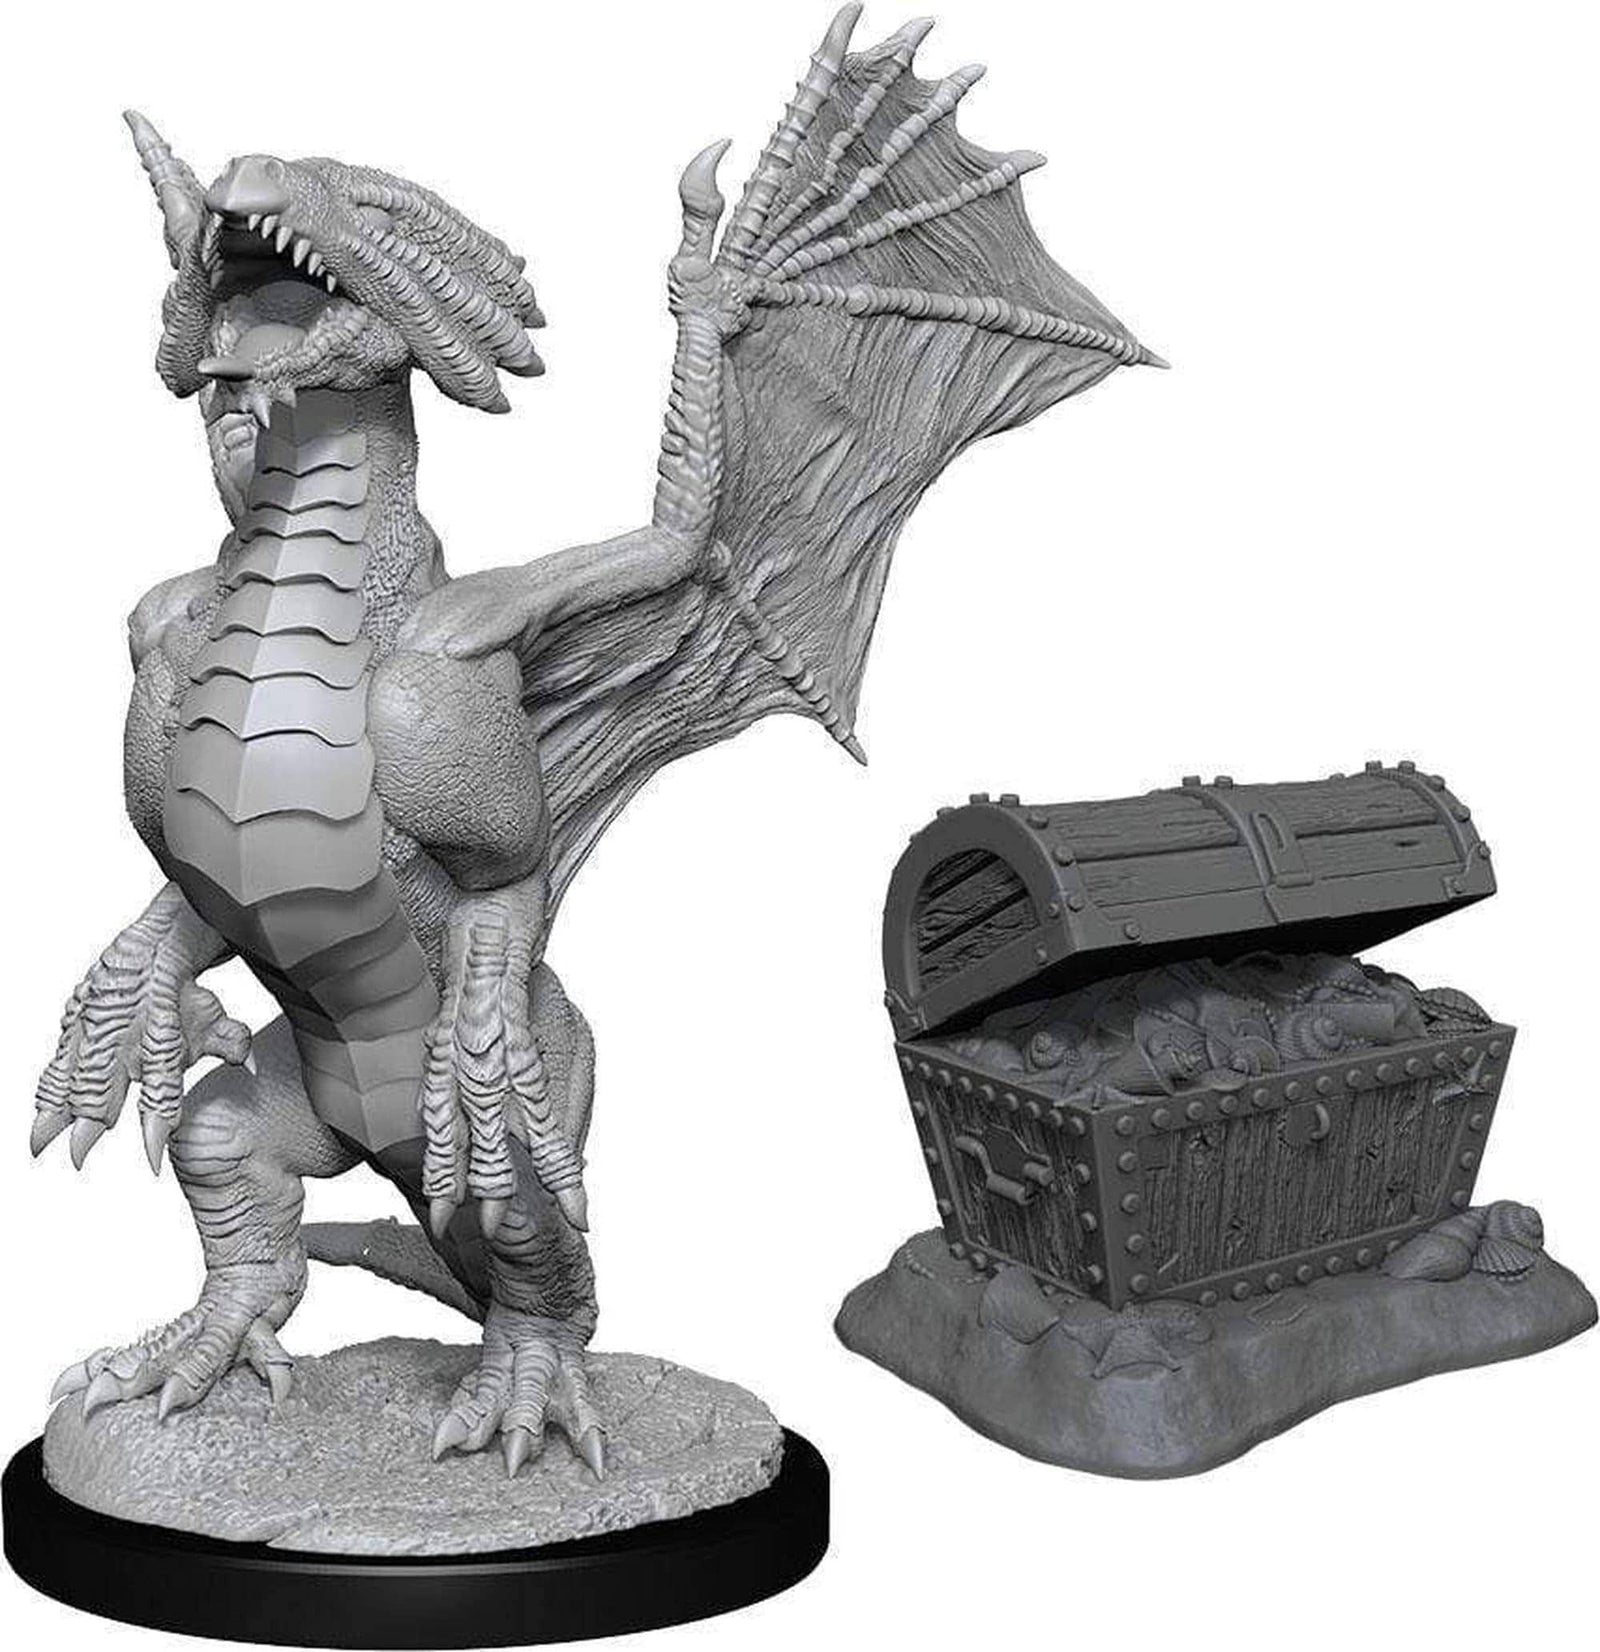 Wizkids/Neca Role Playing Games D&D Miniatures - W13 Bronze Dragon Wyrmling & Pile of Sea found Treasure